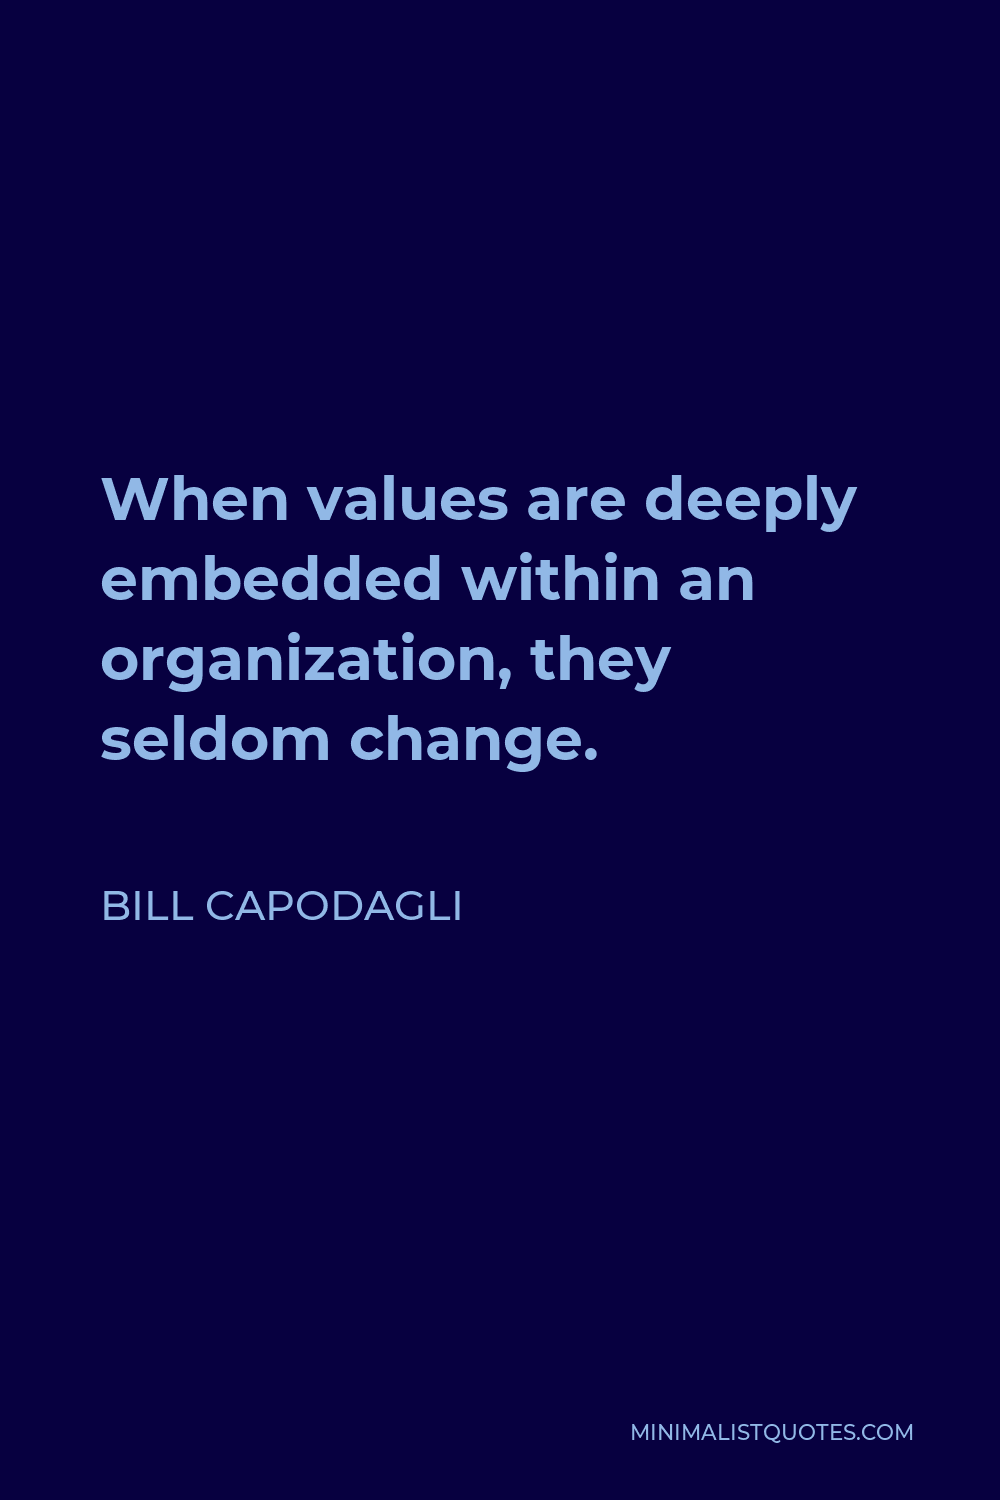 Bill Capodagli Quote - When values are deeply embedded within an organization, they seldom change.